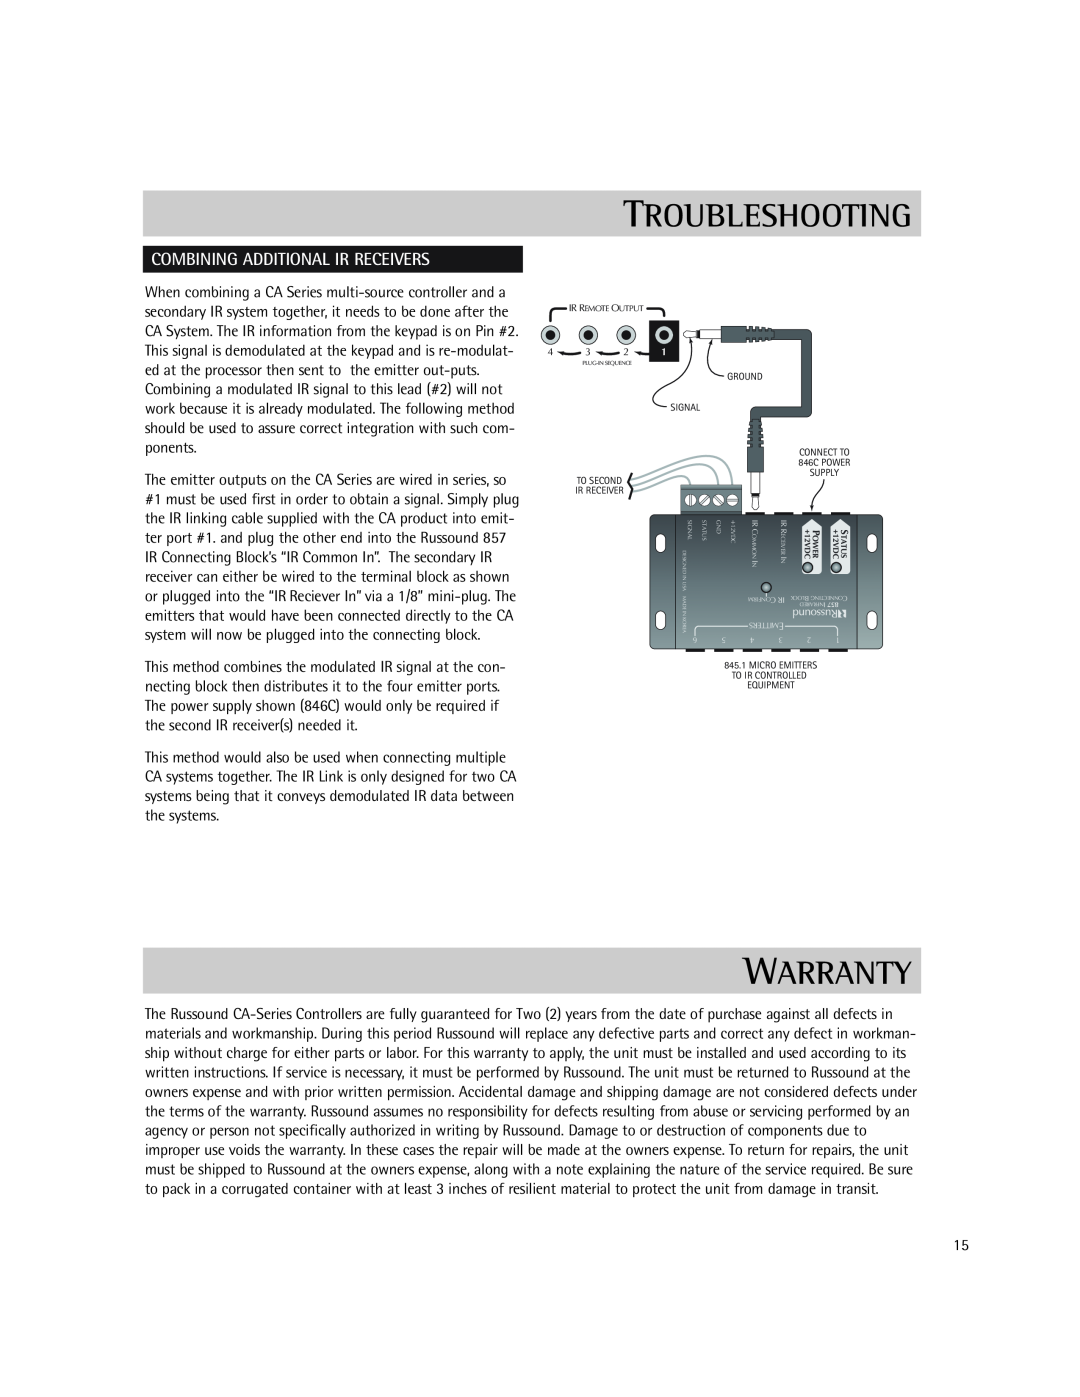 Russound CA-Series instruction manual Warranty, Troubleshooting, Combining Additional Ir Receivers 